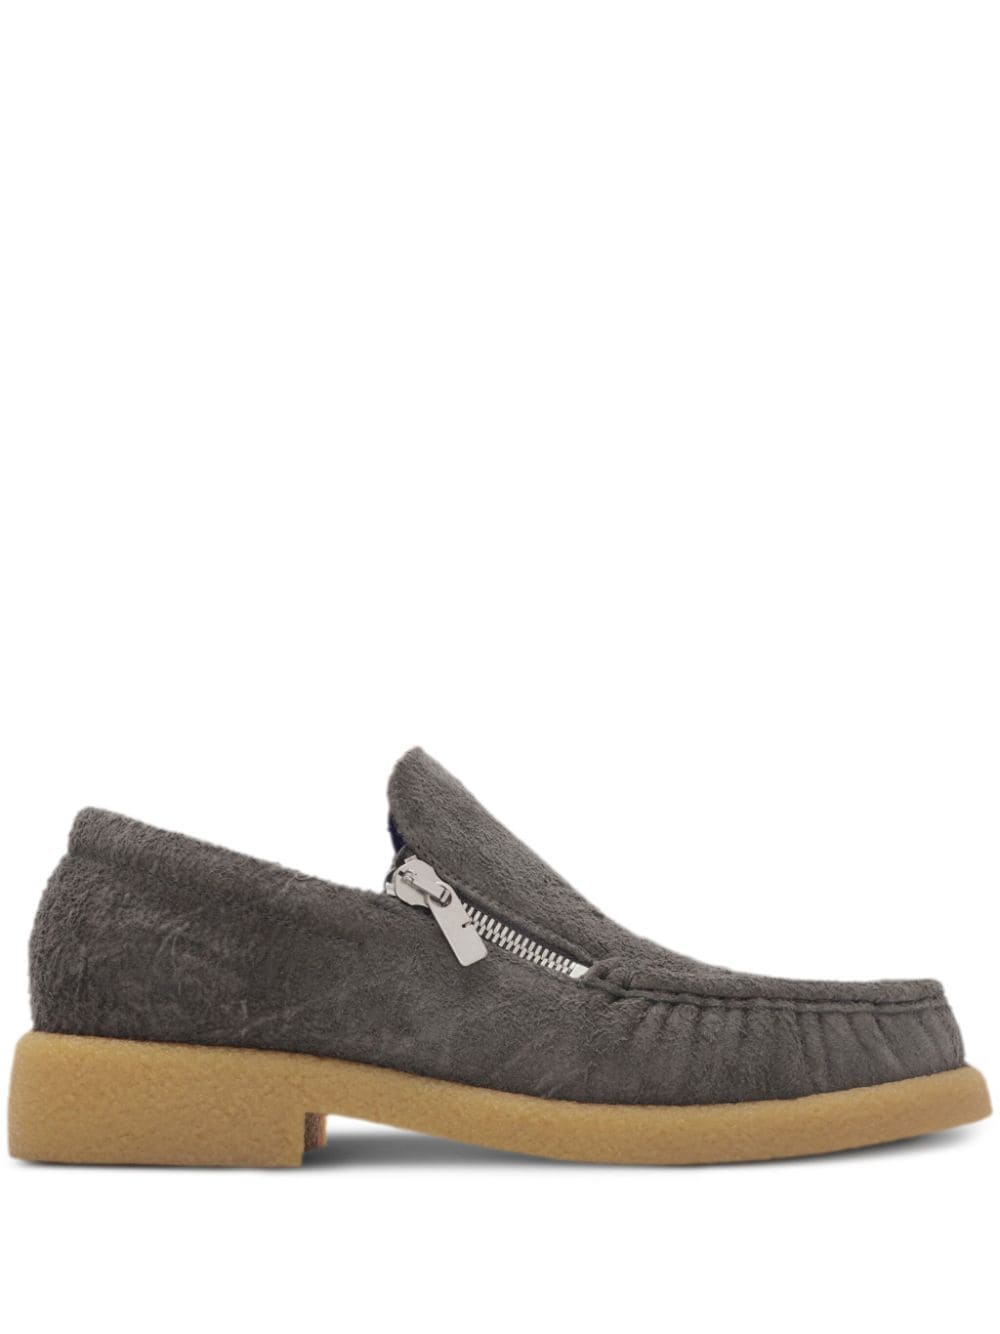 Image 1 of Burberry Chance suede loafers